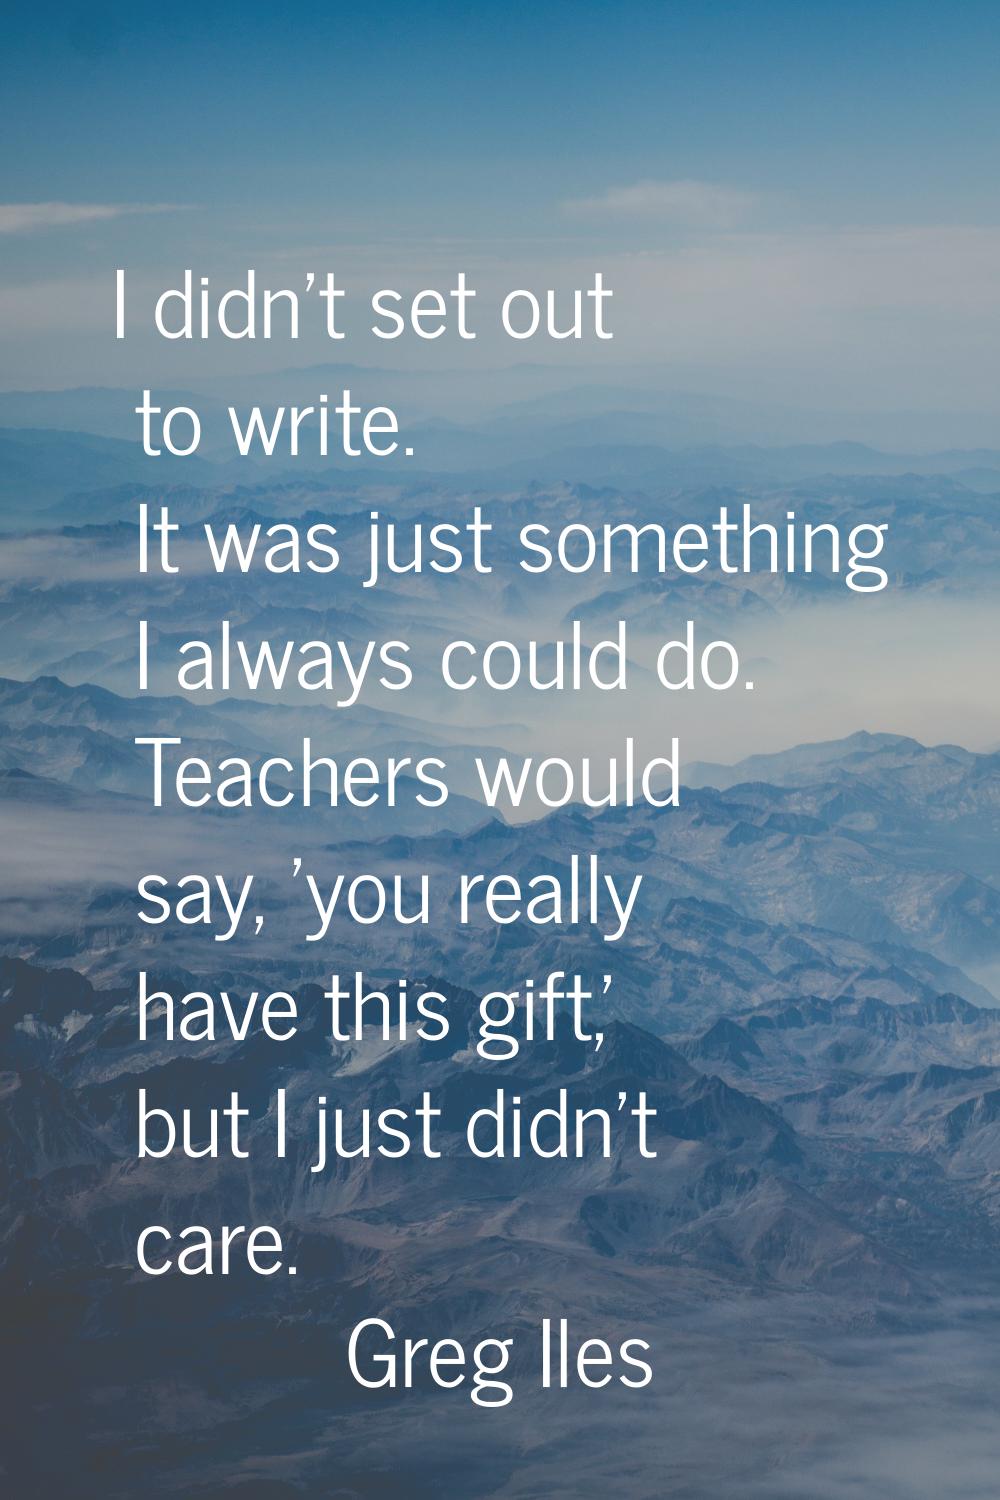 I didn't set out to write. It was just something I always could do. Teachers would say, 'you really